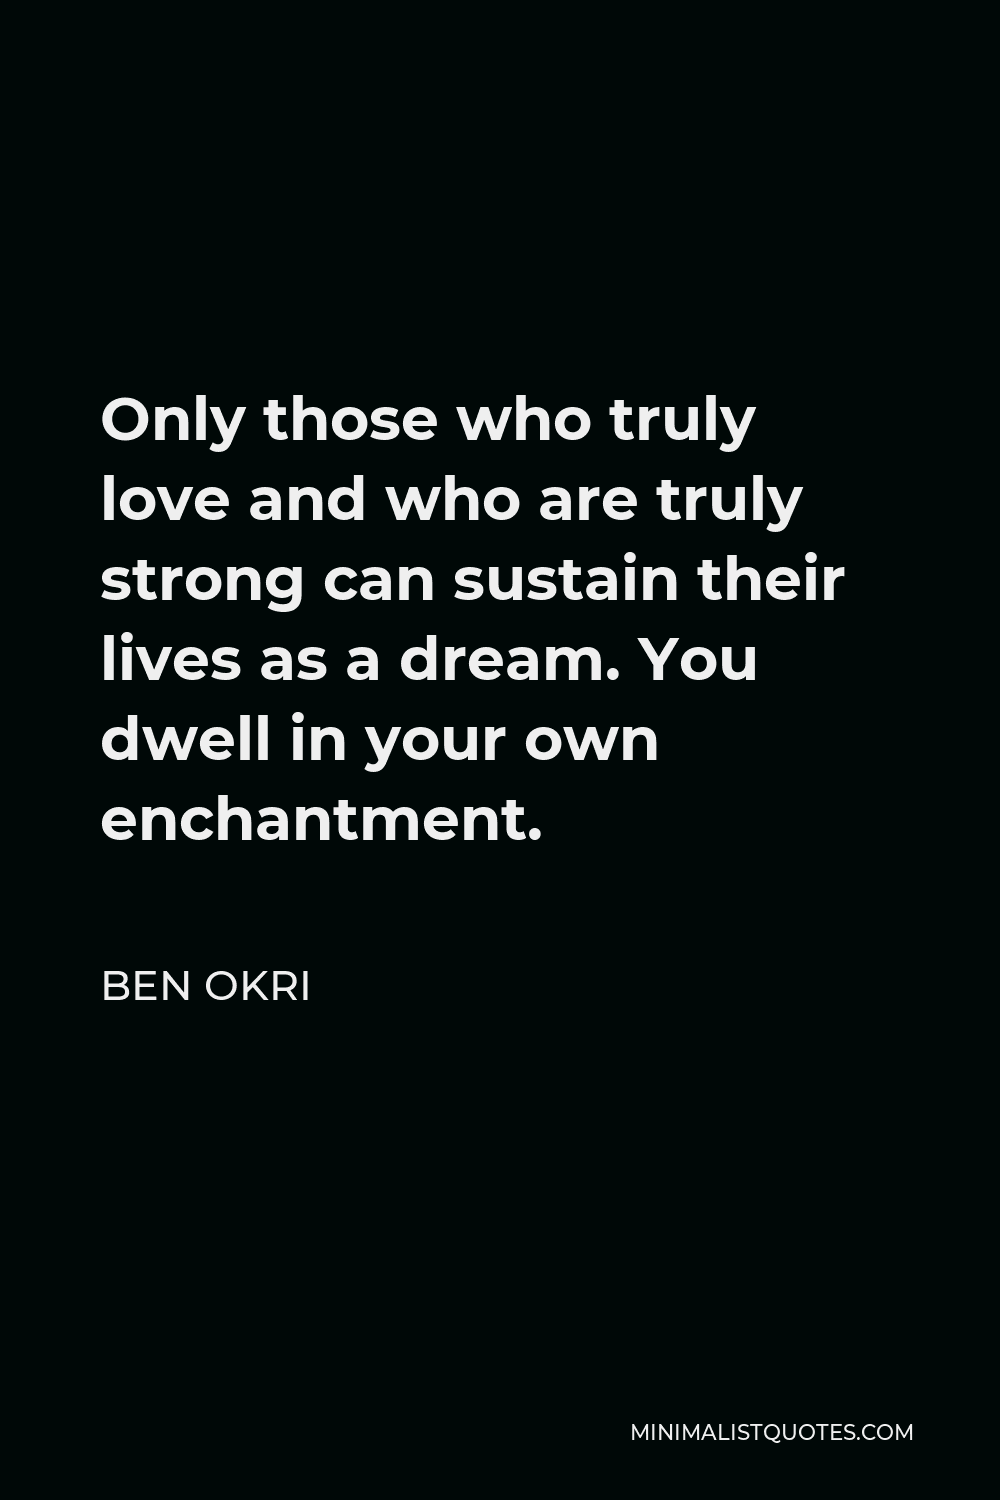 Ben Okri Quote - Only those who truly love and who are truly strong can sustain their lives as a dream. You dwell in your own enchantment.